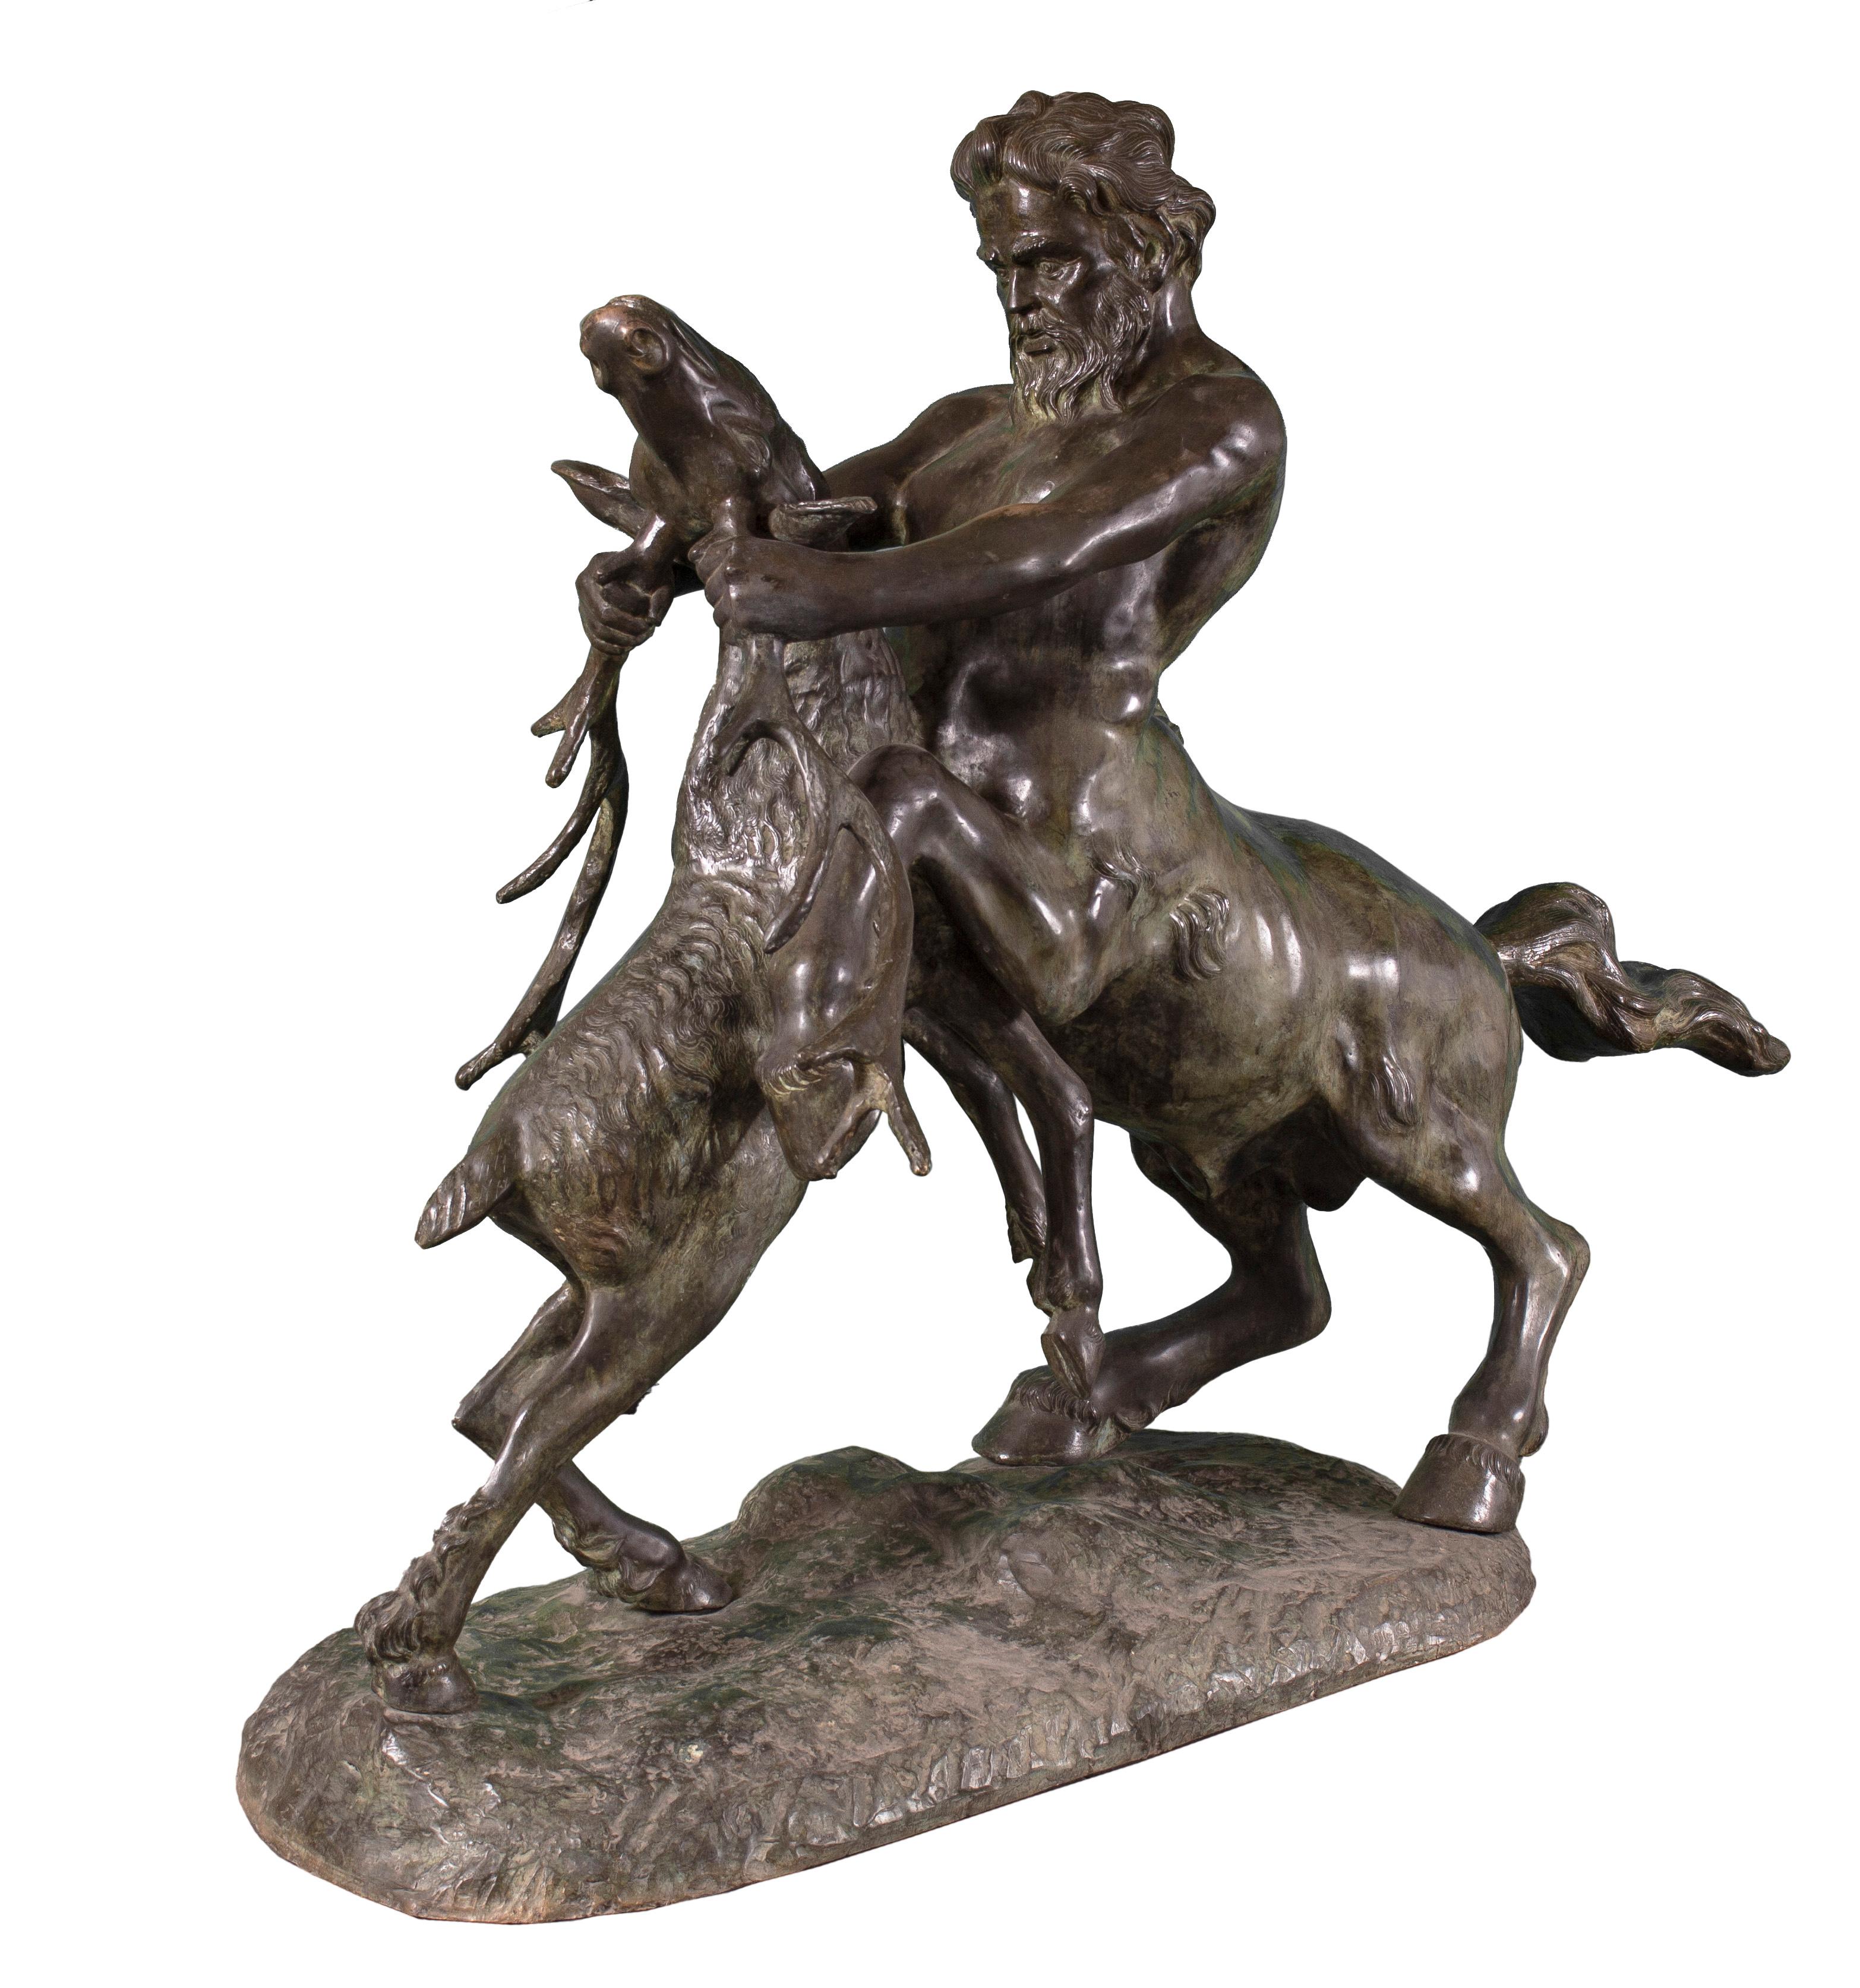 Bronze sculpture in excellent quality. The sculpture is impressive and in very good condition, flawless. The battle between the centaur and deer, and the tension between them, is realistically conveyed in the sculpture.